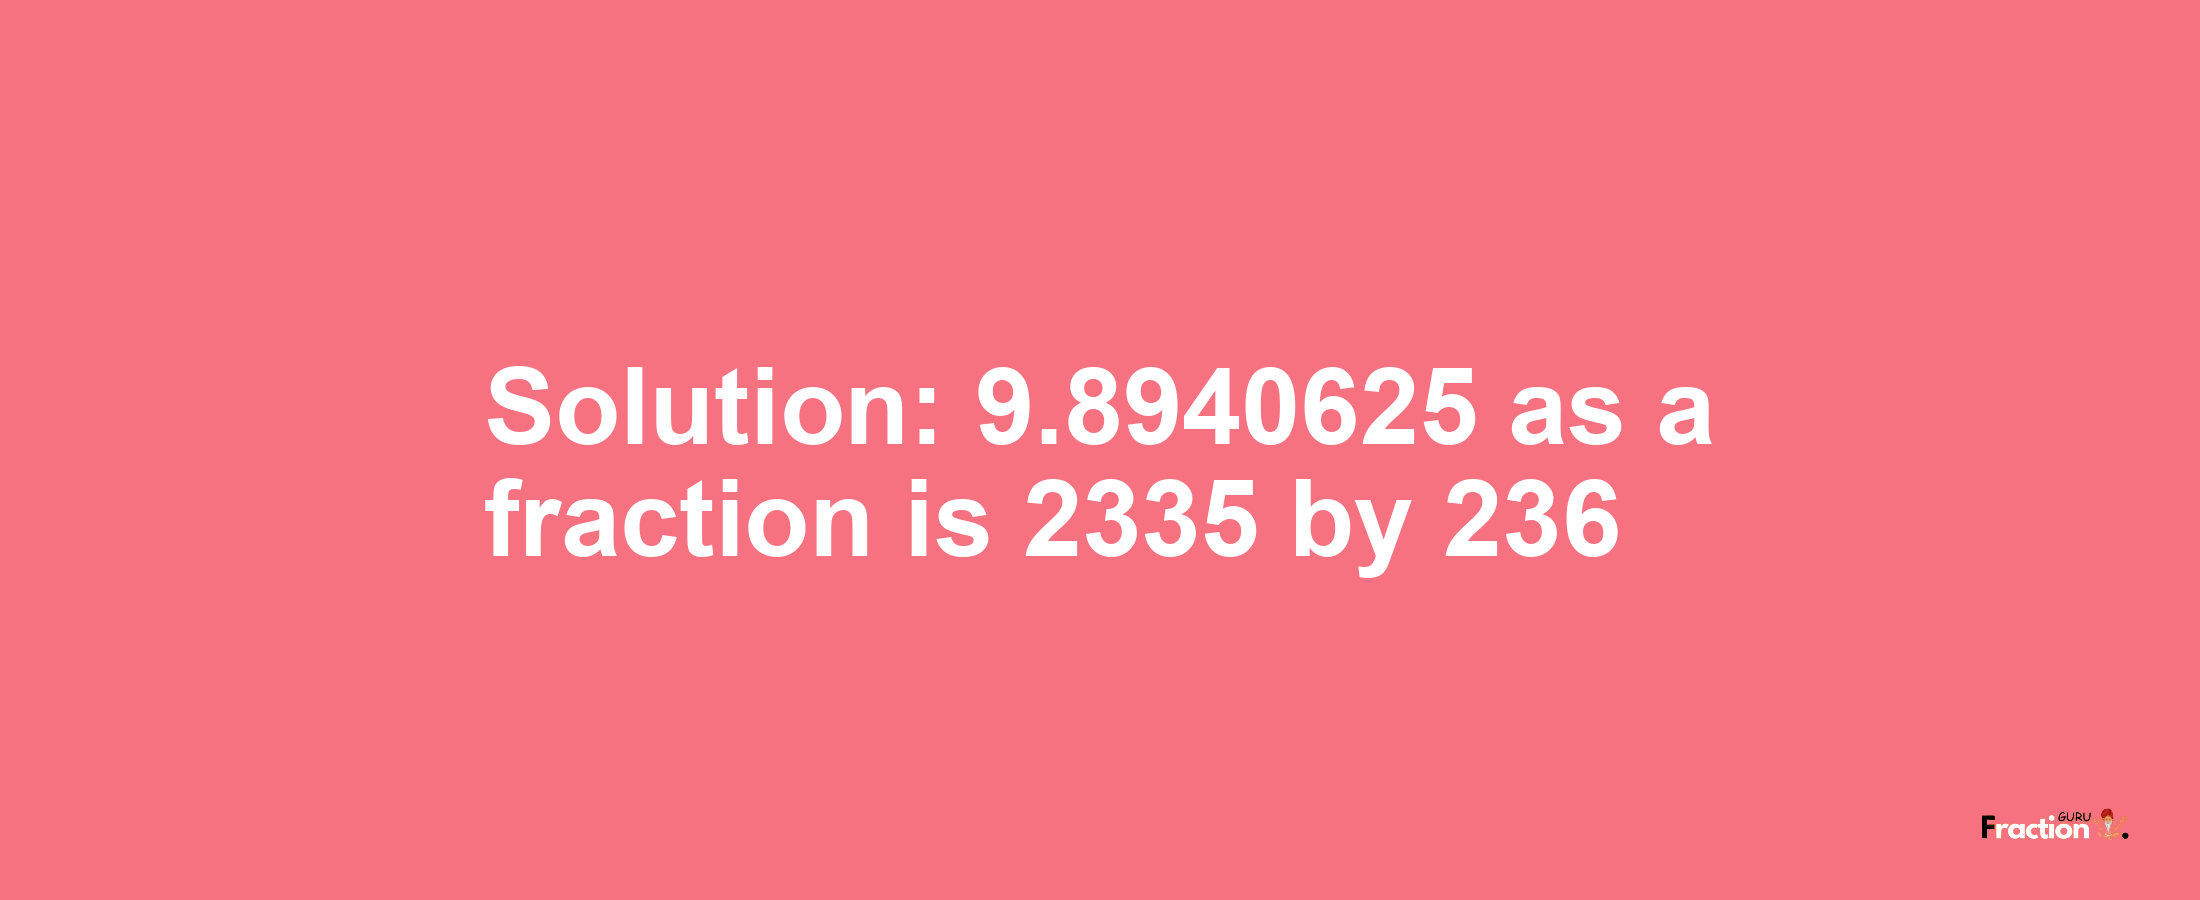 Solution:9.8940625 as a fraction is 2335/236